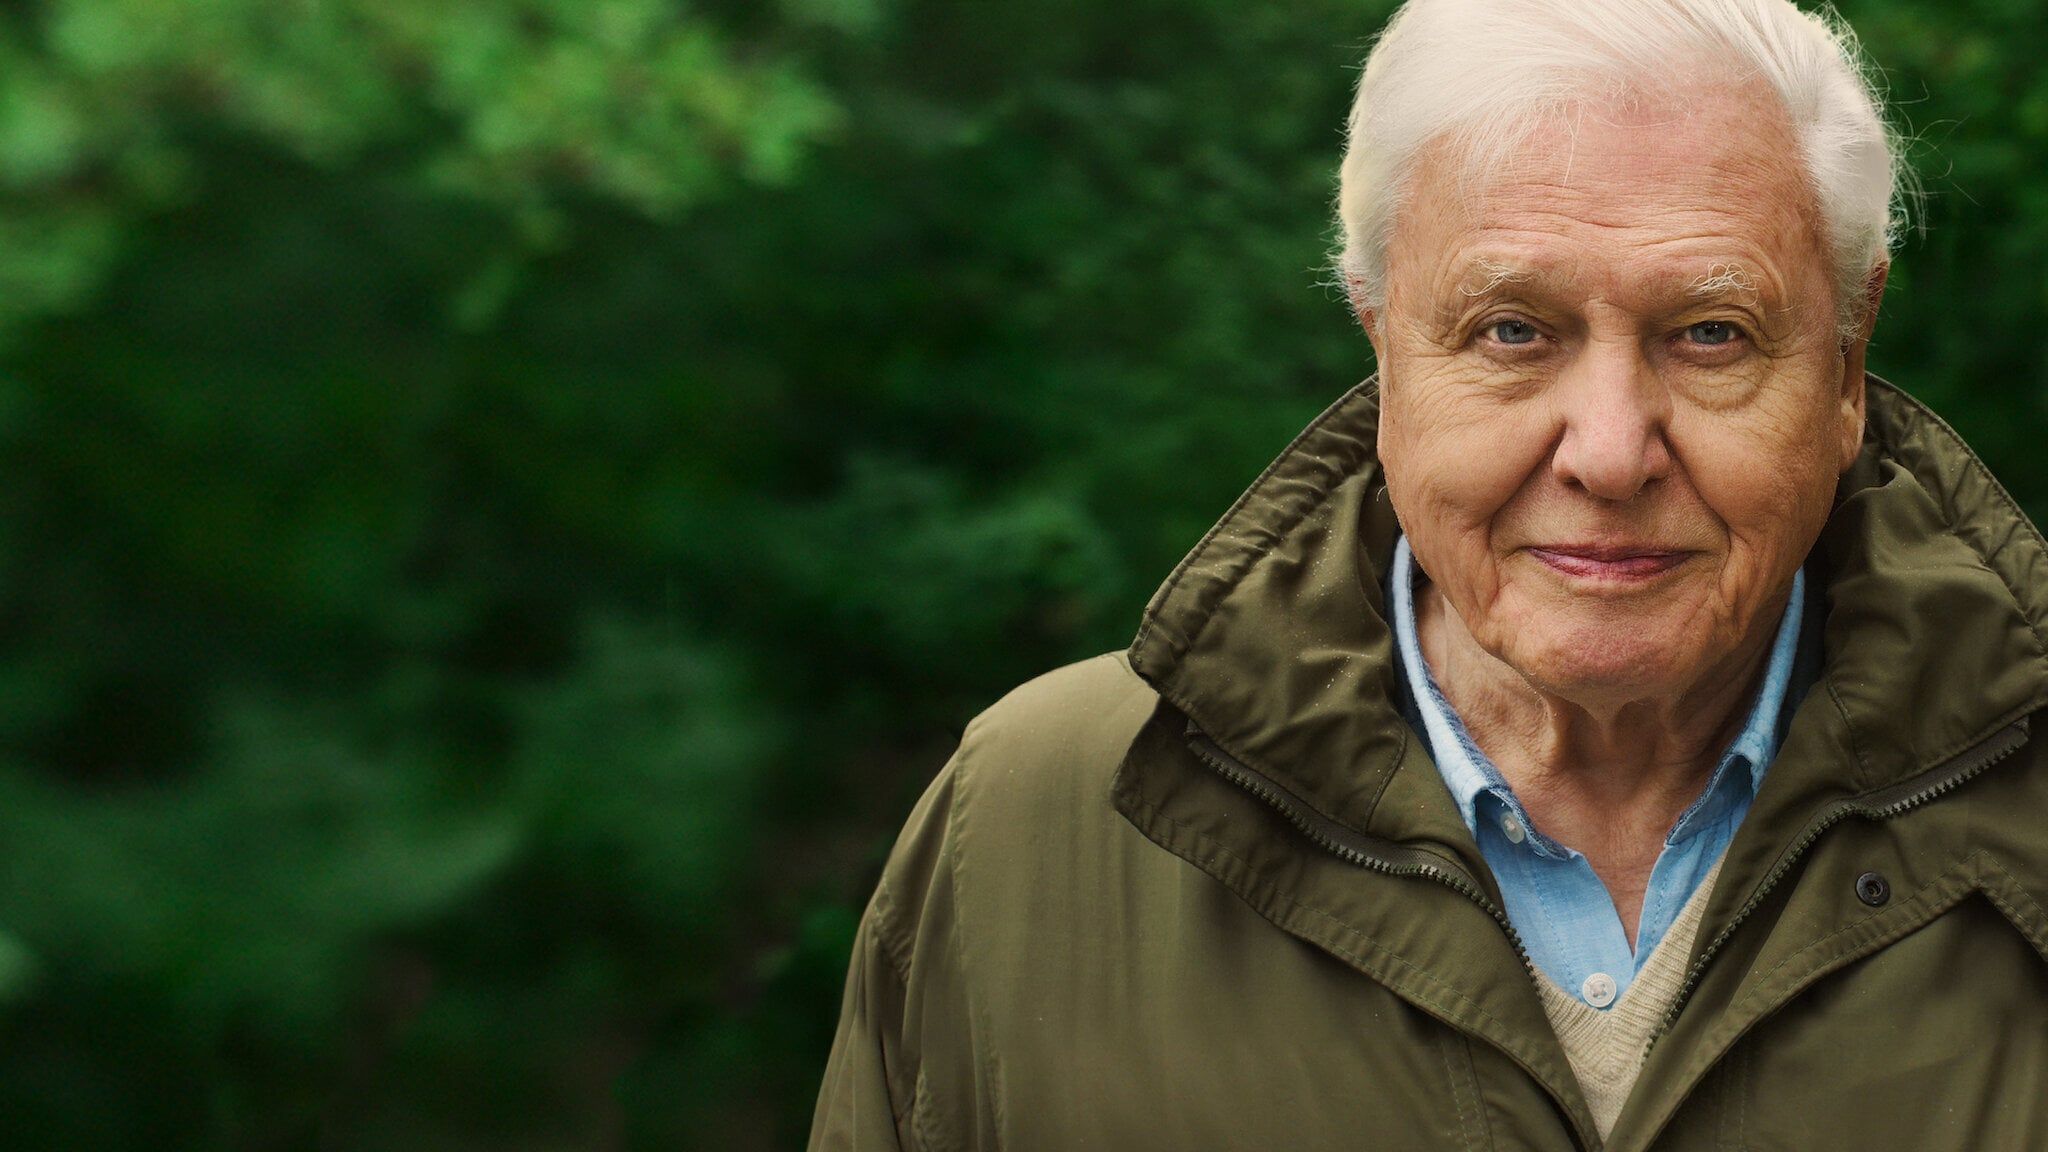 David Attenborough: A Life on Our Planet [Documentary Movie] 2020 Stream Online Attenborough: A Life on Our Planet Movie 2020 Full